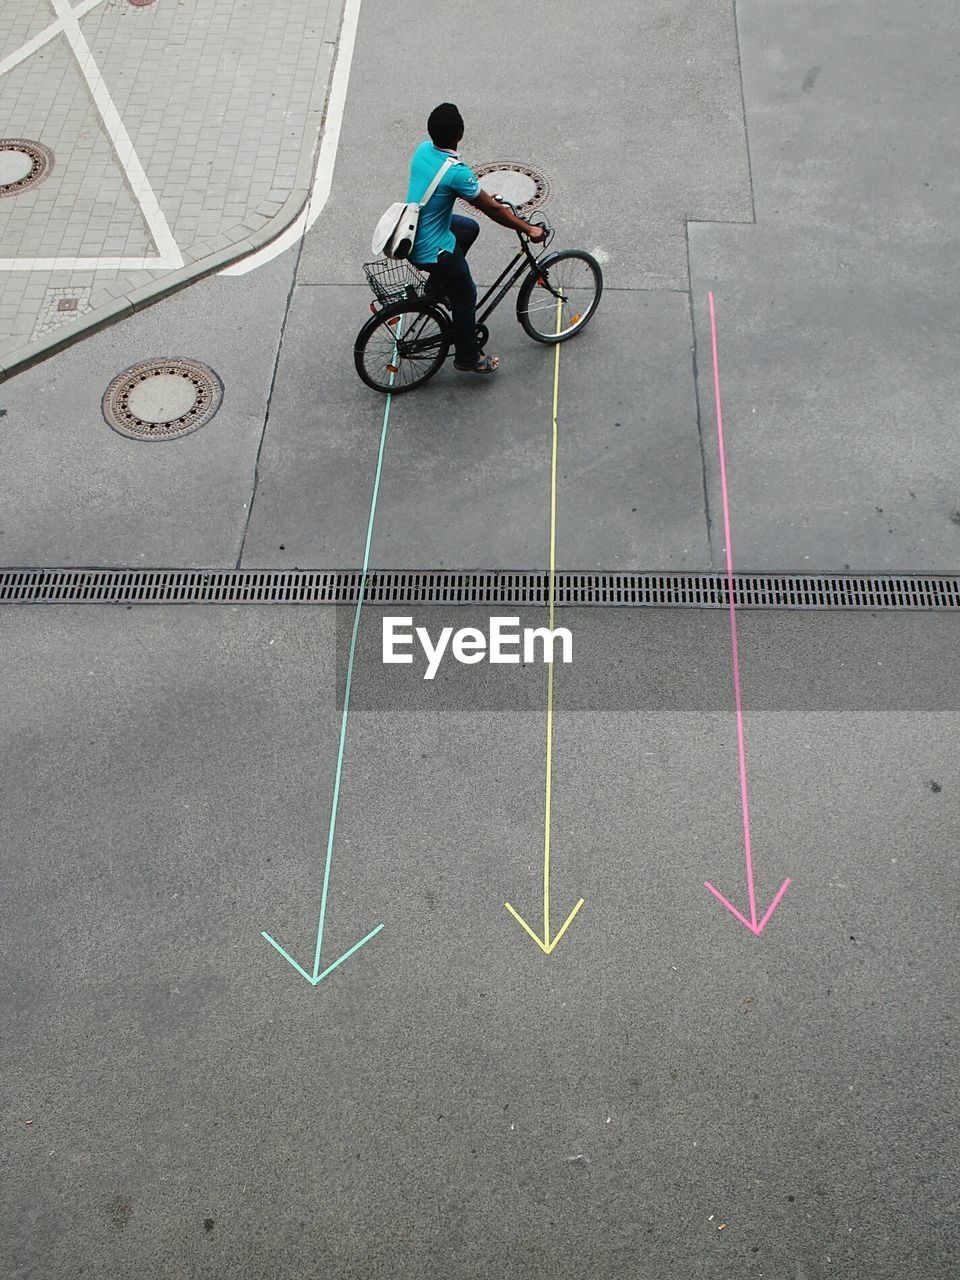 High angle view of man cycling over arrows symbols on street